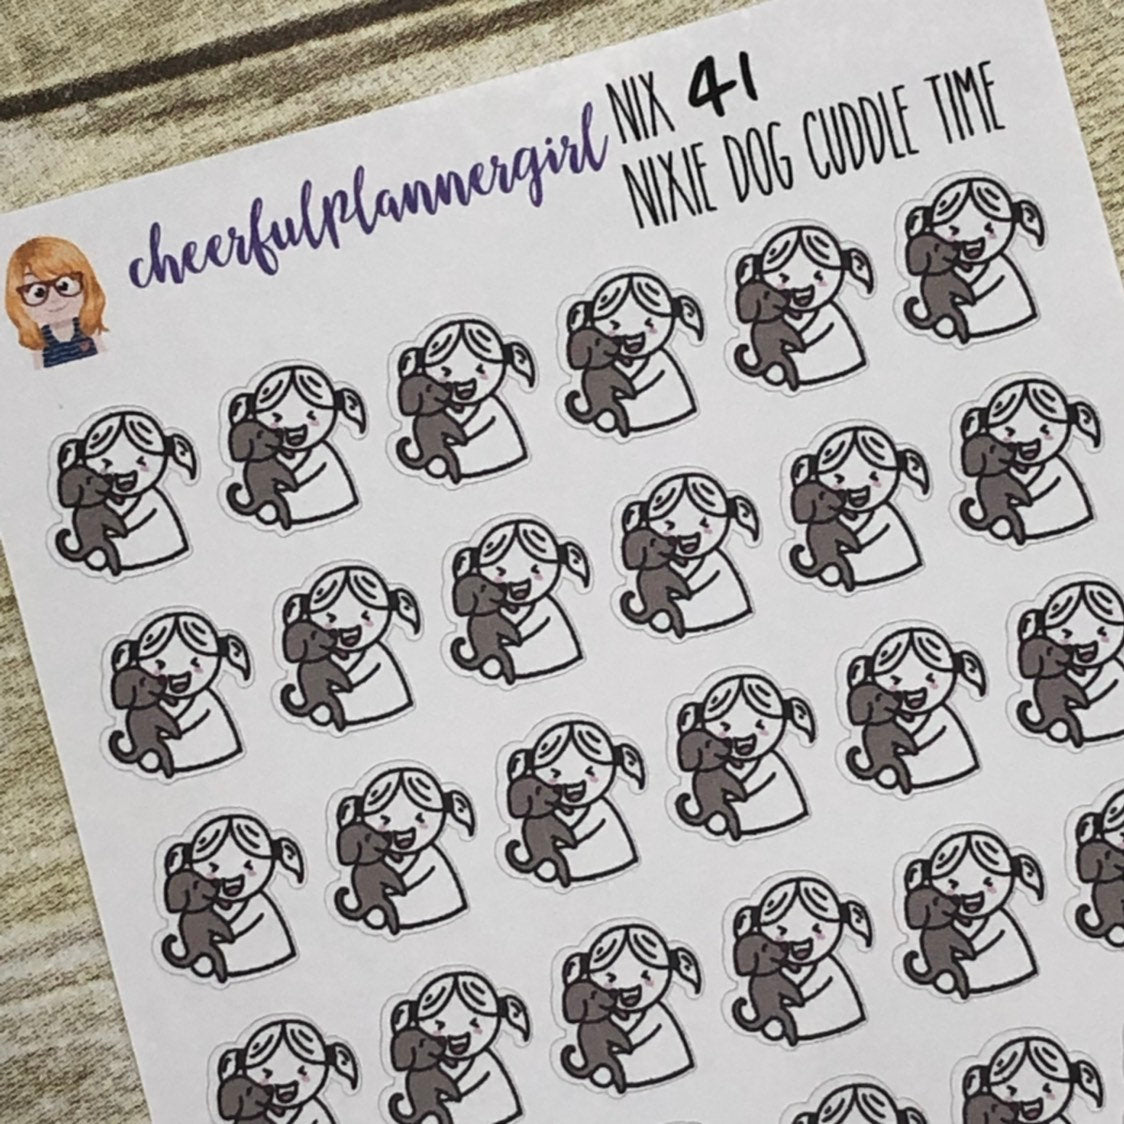 Nixie Dog Cuddle Time Planner Stickers